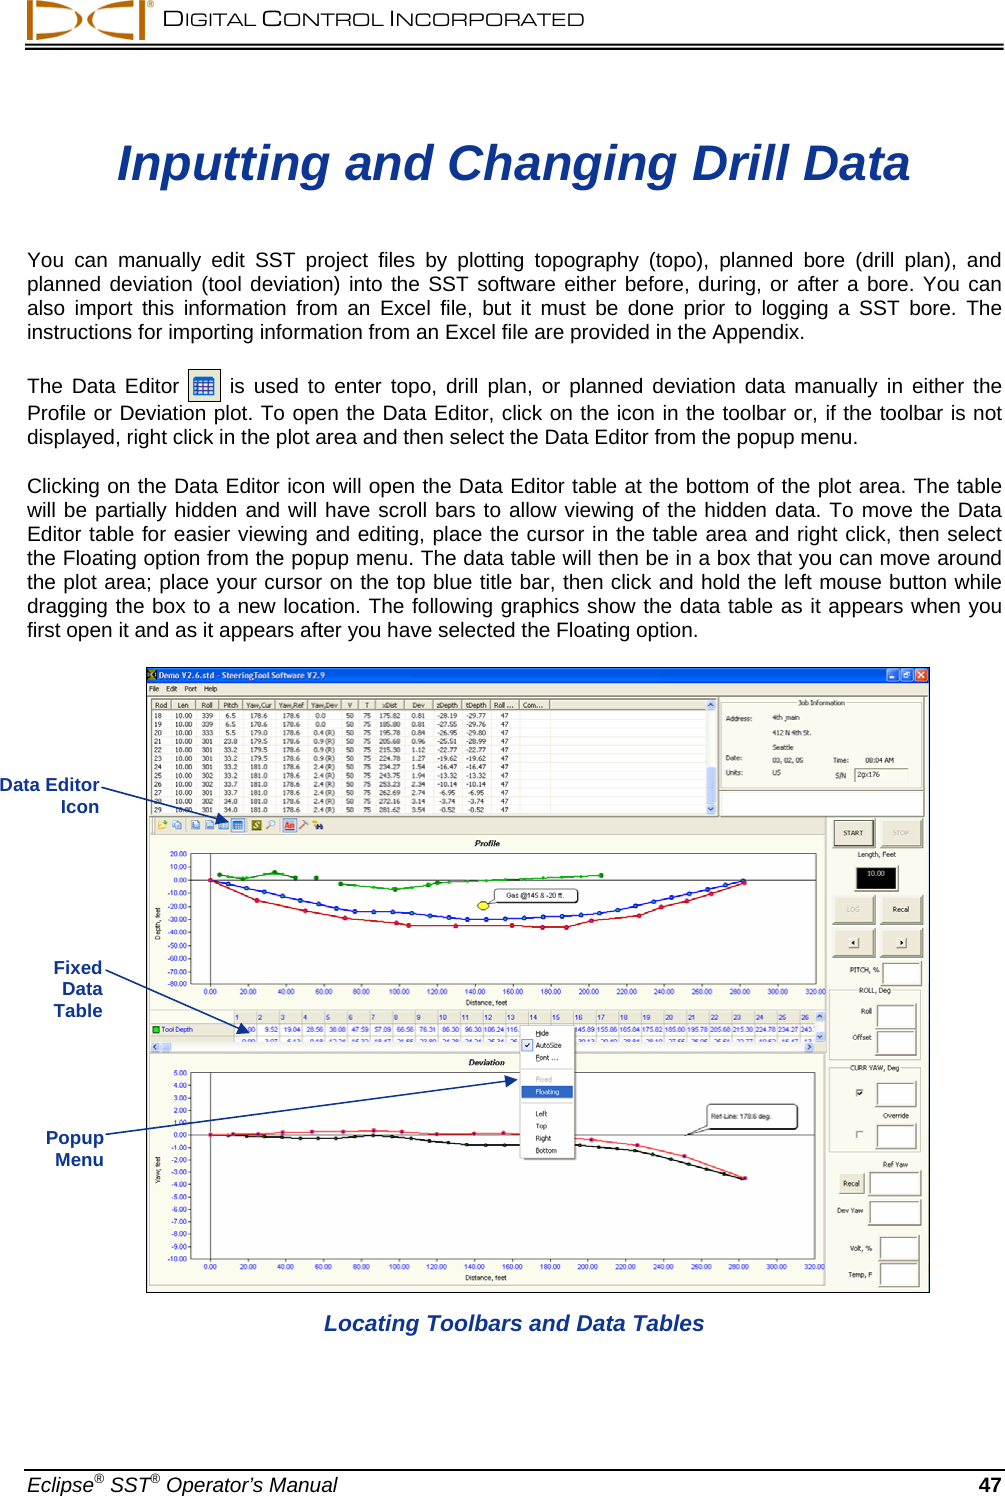  DIGITAL CONTROL INCORPORATED  Inputting and Changing Drill Data  You can manually edit SST project files by plotting topography (topo), planned bore (drill plan), and planned deviation (tool deviation) into the SST software either before, during, or after a bore. You can also import this information from an Excel file, but it must be done prior to logging a SST bore. The instructions for importing information from an Excel file are provided in the Appendix.  The Data Editor   is used to enter topo, drill plan, or planned deviation data manually in either the Profile or Deviation plot. To open the Data Editor, click on the icon in the toolbar or, if the toolbar is not displayed, right click in the plot area and then select the Data Editor from the popup menu.   Clicking on the Data Editor icon will open the Data Editor table at the bottom of the plot area. The table will be partially hidden and will have scroll bars to allow viewing of the hidden data. To move the Data Editor table for easier viewing and editing, place the cursor in the table area and right click, then select the Floating option from the popup menu. The data table will then be in a box that you can move around the plot area; place your cursor on the top blue title bar, then click and hold the left mouse button while dragging the box to a new location. The following graphics show the data table as it appears when you first open it and as it appears after you have selected the Floating option.           Data Editor  Icon Fixed  Data  Table Popup  Menu Locating Toolbars and Data Tables Eclipse® SST® Operator’s Manual  47 